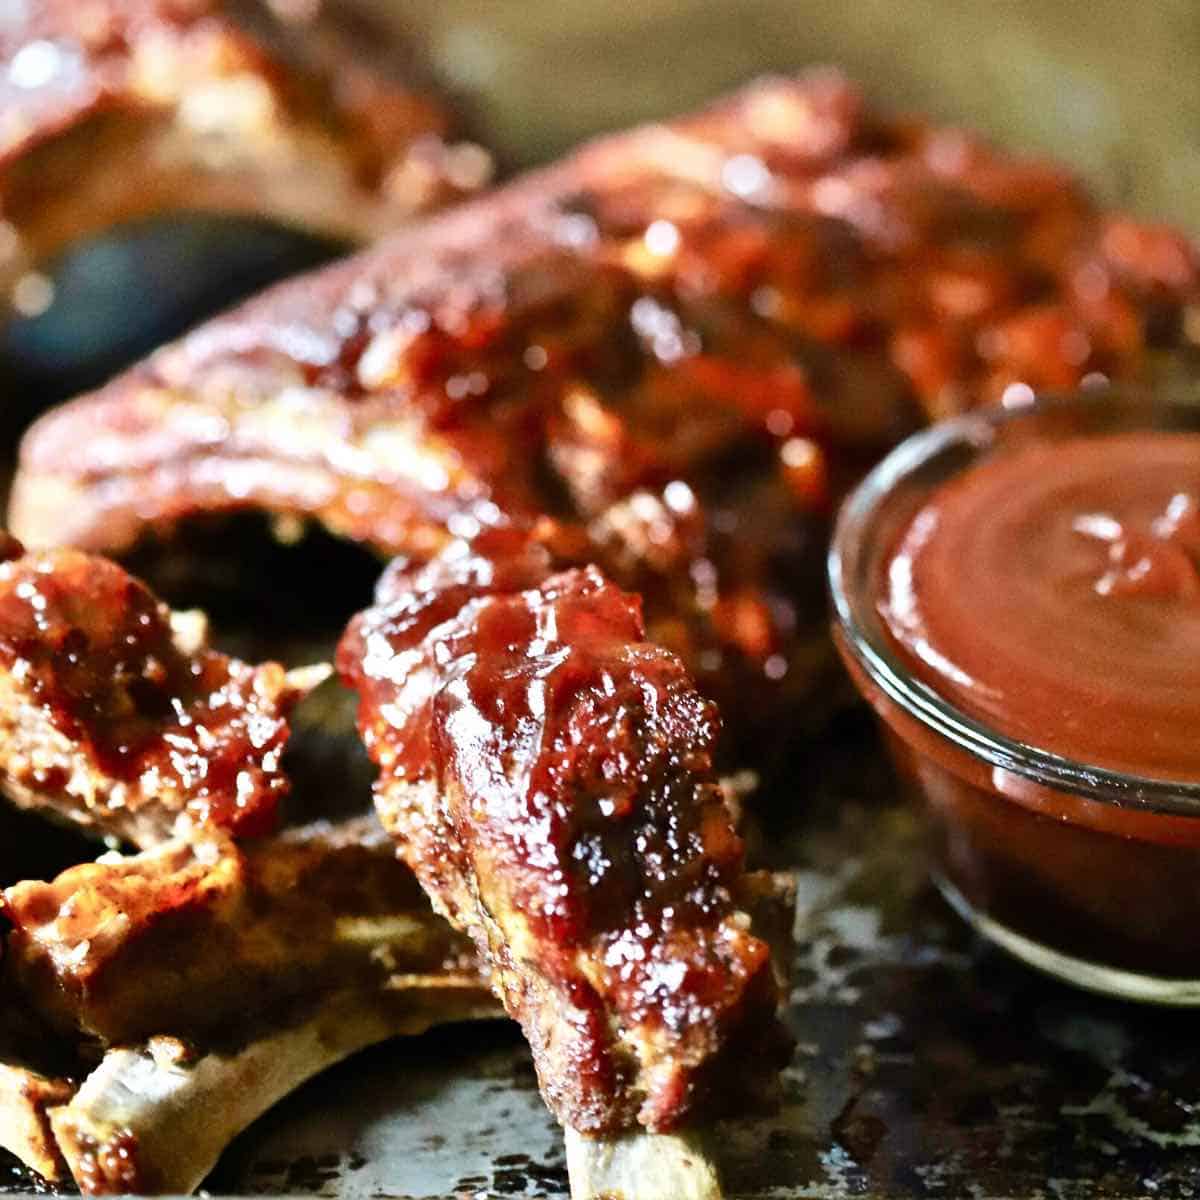 A rack of baby back ribs next to a bowl of barbecue sauce.